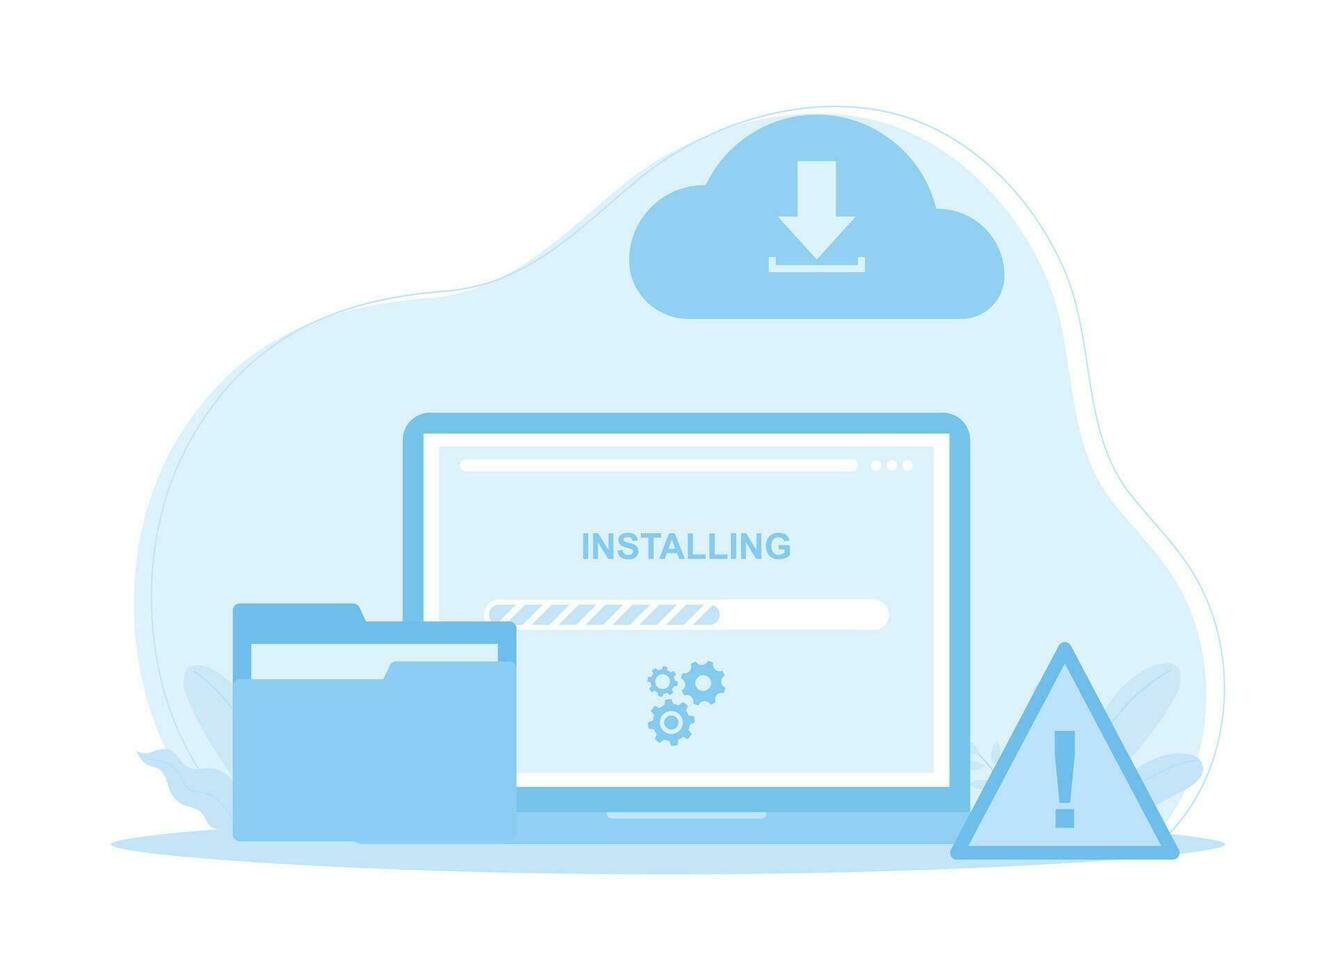 install cloud database for data security concept flat illustration vector